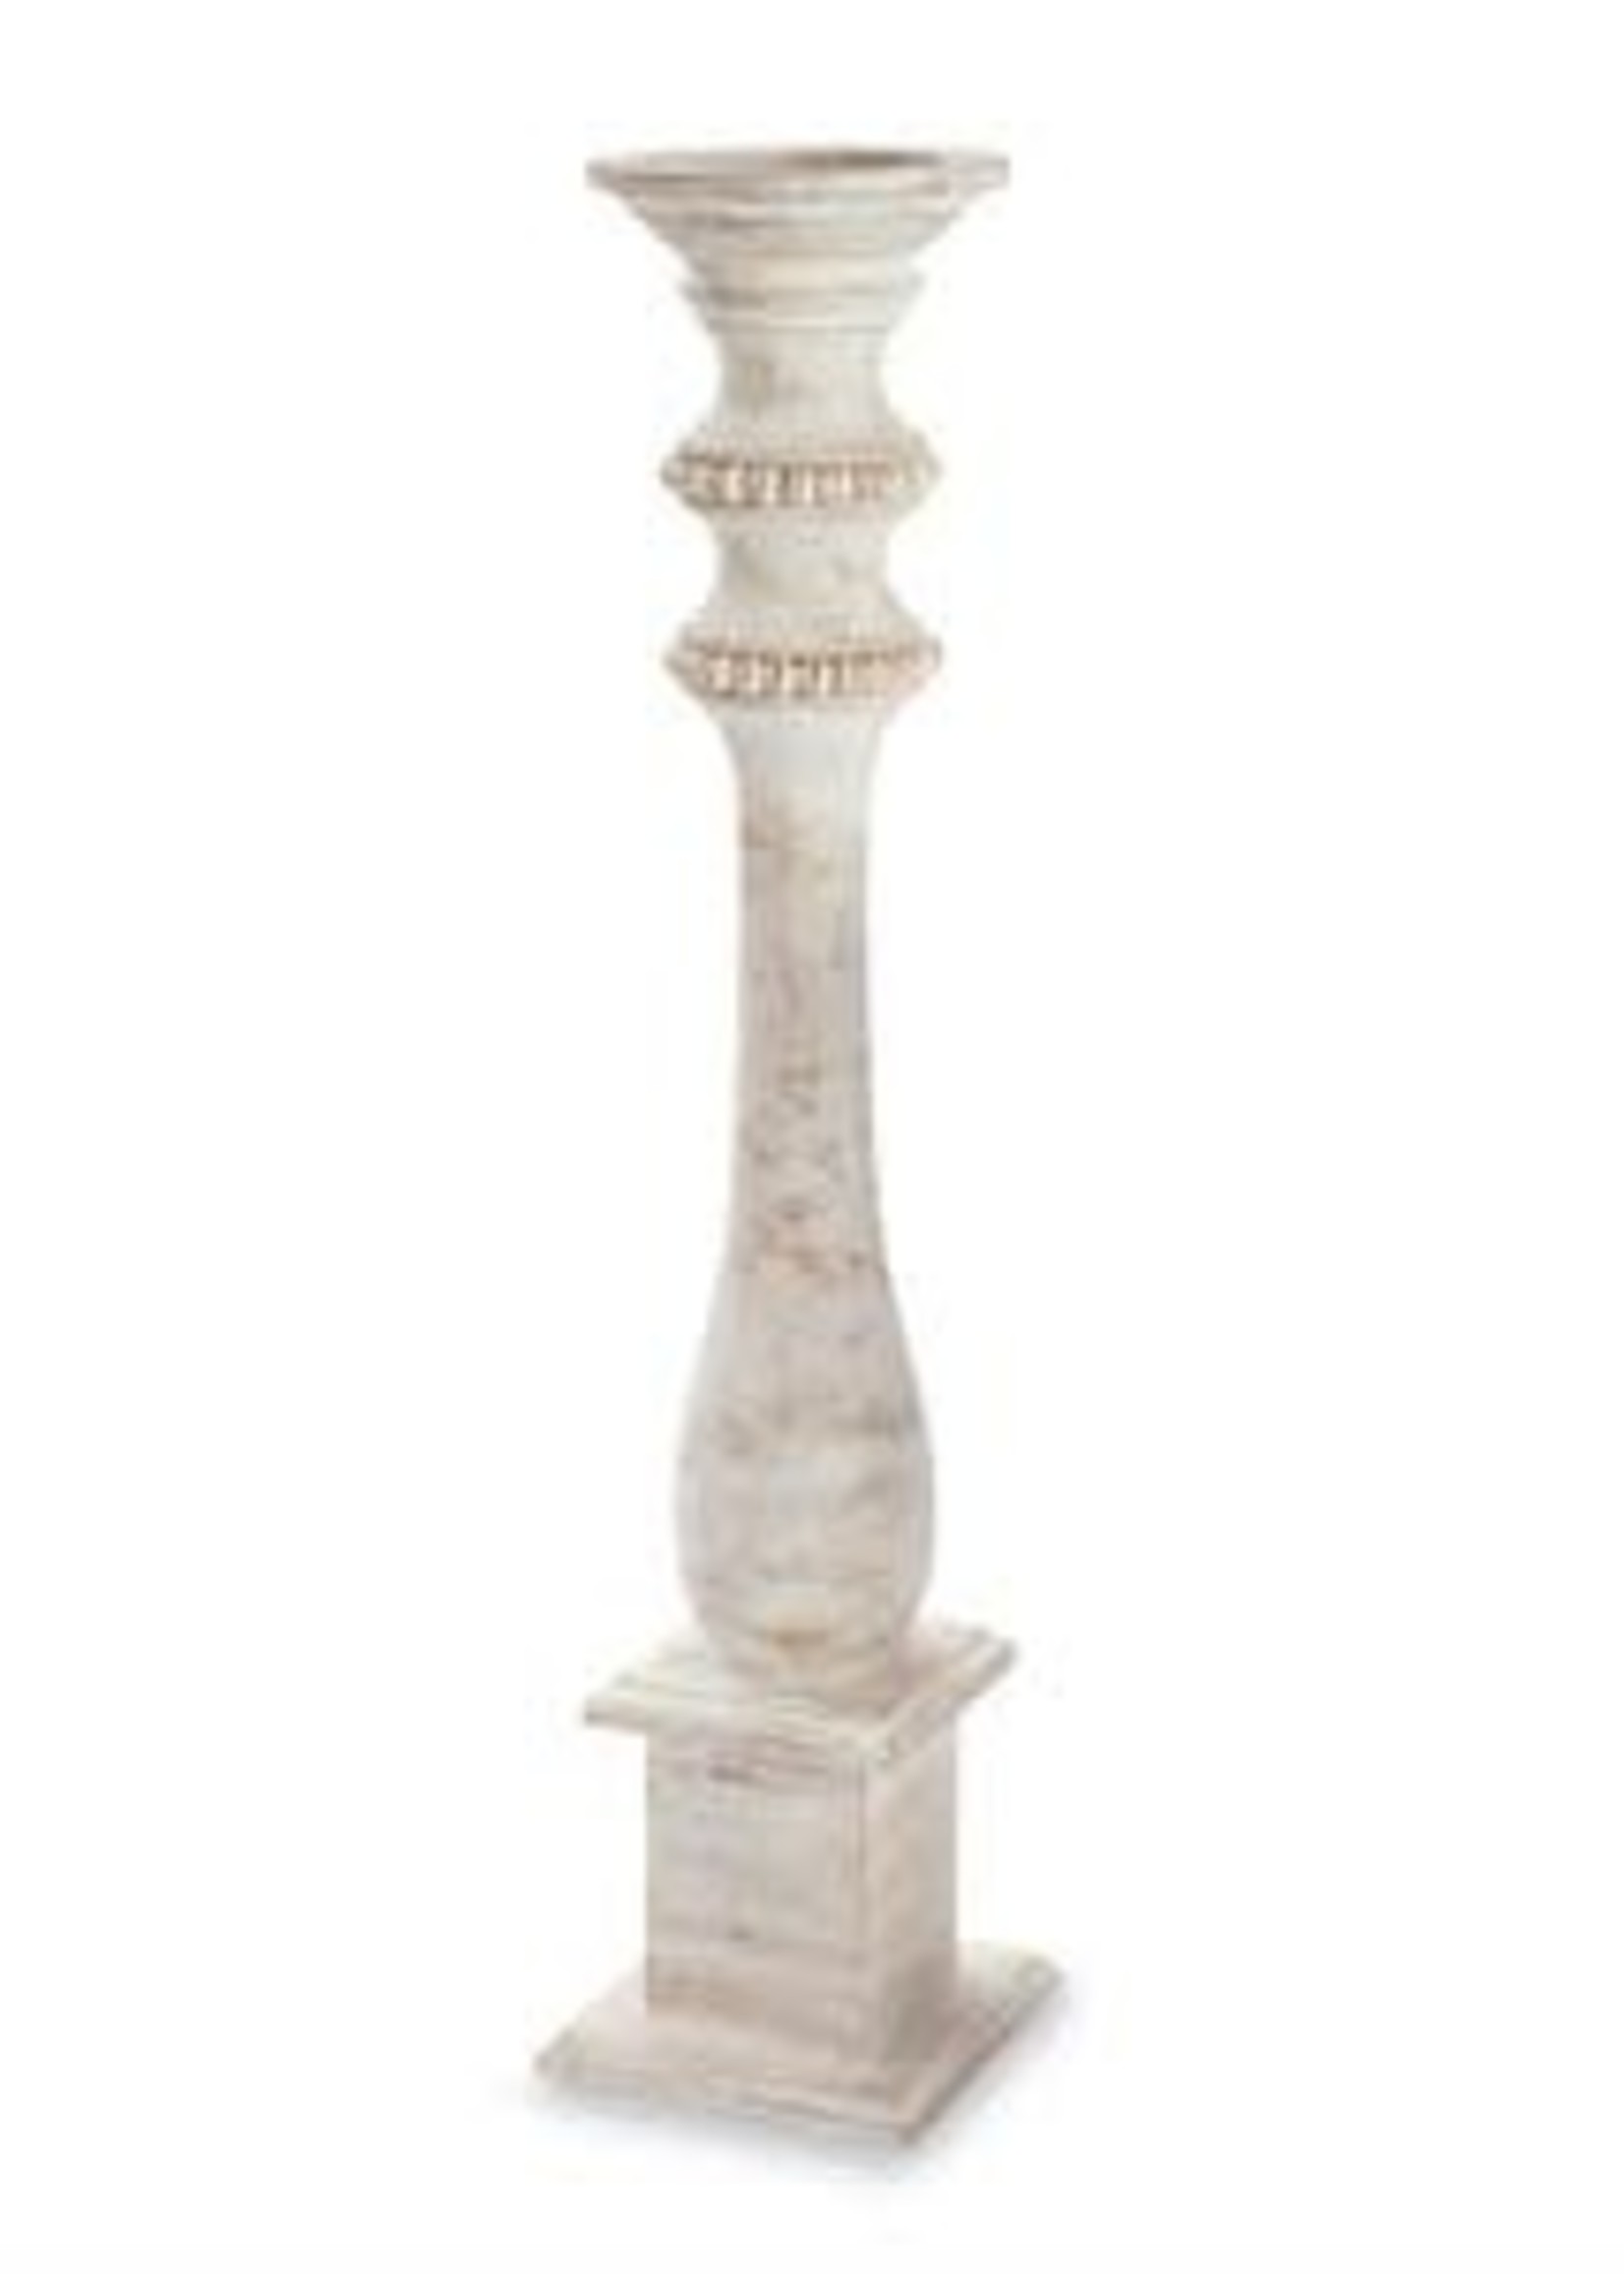 Mud Pie Large Beaded Wood Candle Stick